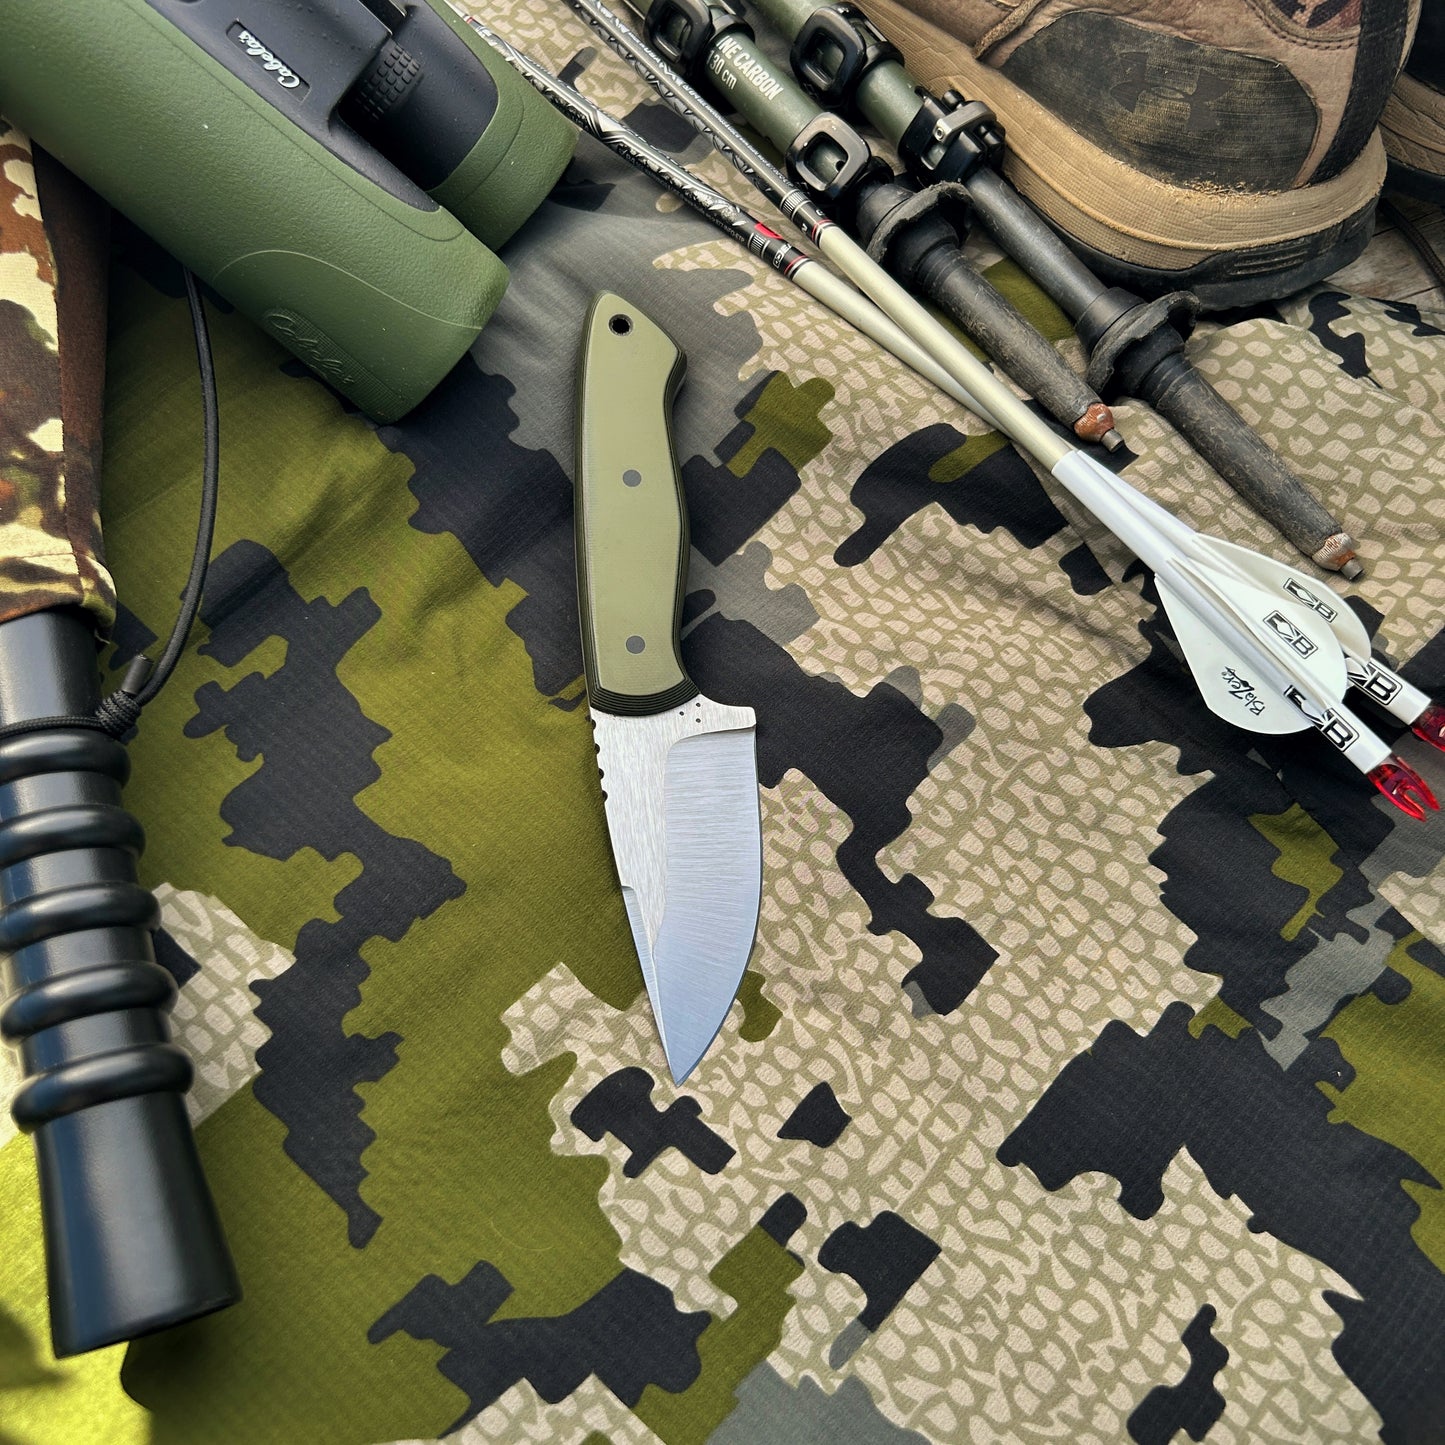 Layered OD green & black handled drop point hunter knife pictured with hunting gear. Great knife for any outdoorsman